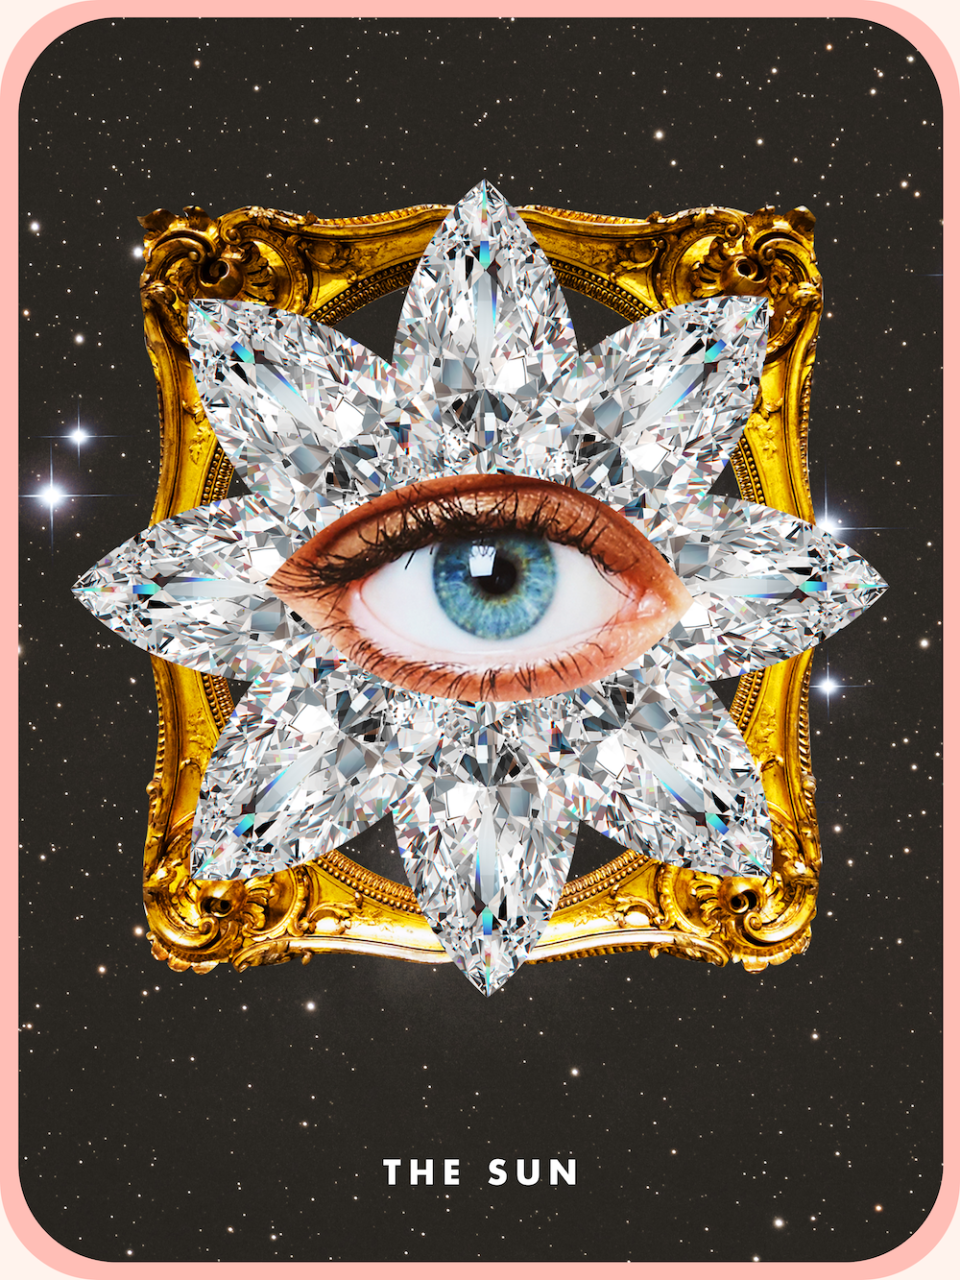 the tarot card the sun, showing a single eye in the middle of a star shaped diamond